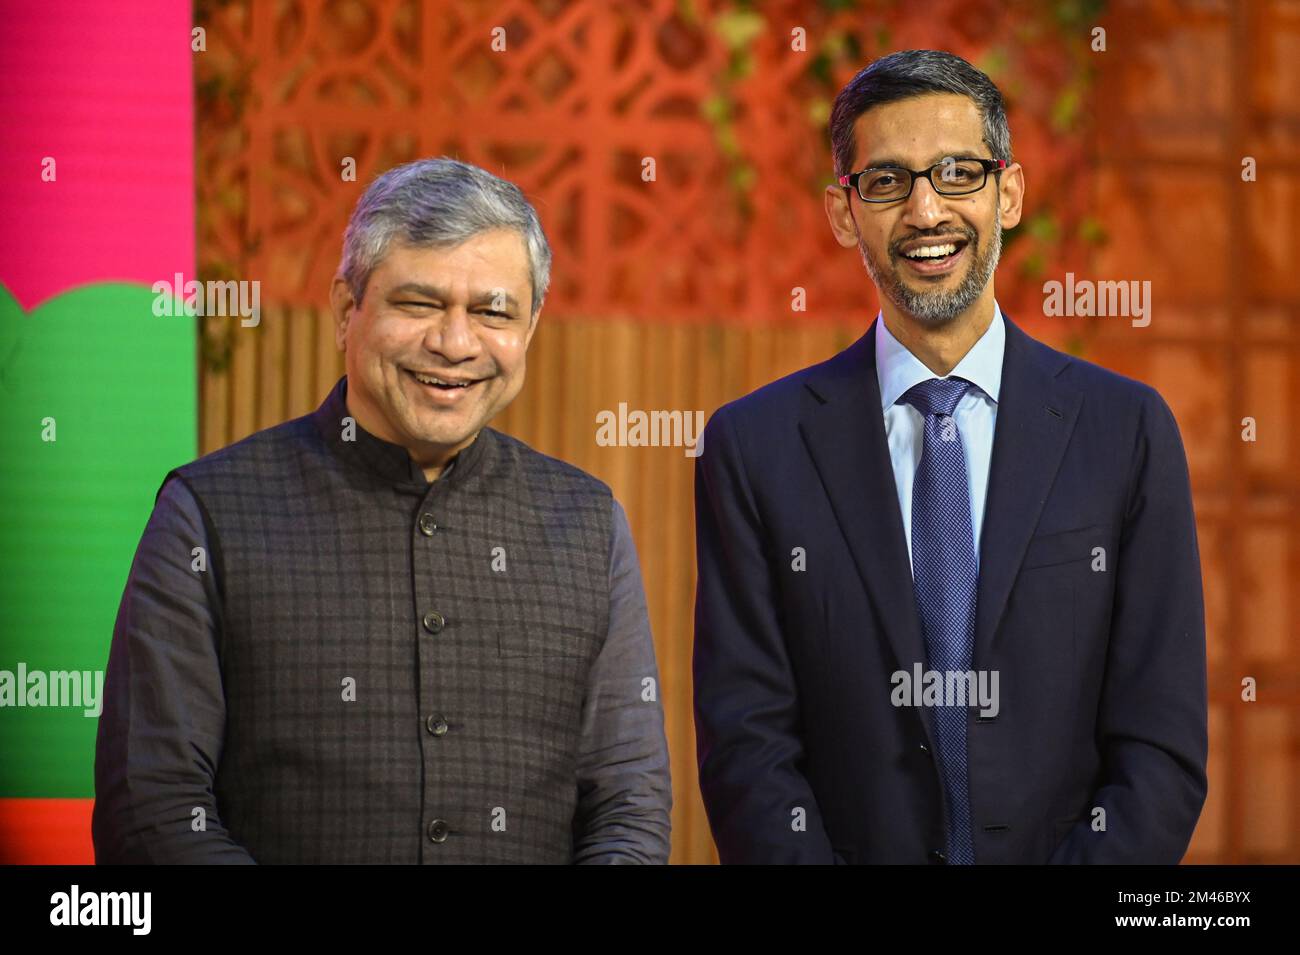 New Delhi, Delhi, India. 19th Dec, 2022. Minister of Railways, Communications and Electronics and Information Technology Ashwini Vaishnaw (L) and Sundar Pichai, Chief Executive Officer (CEO) of Google Inc. (R) pose for a photograph during Google for India event in New Delhi (Credit Image: © Kabir Jhangiani/ZUMA Press Wire) Stock Photo